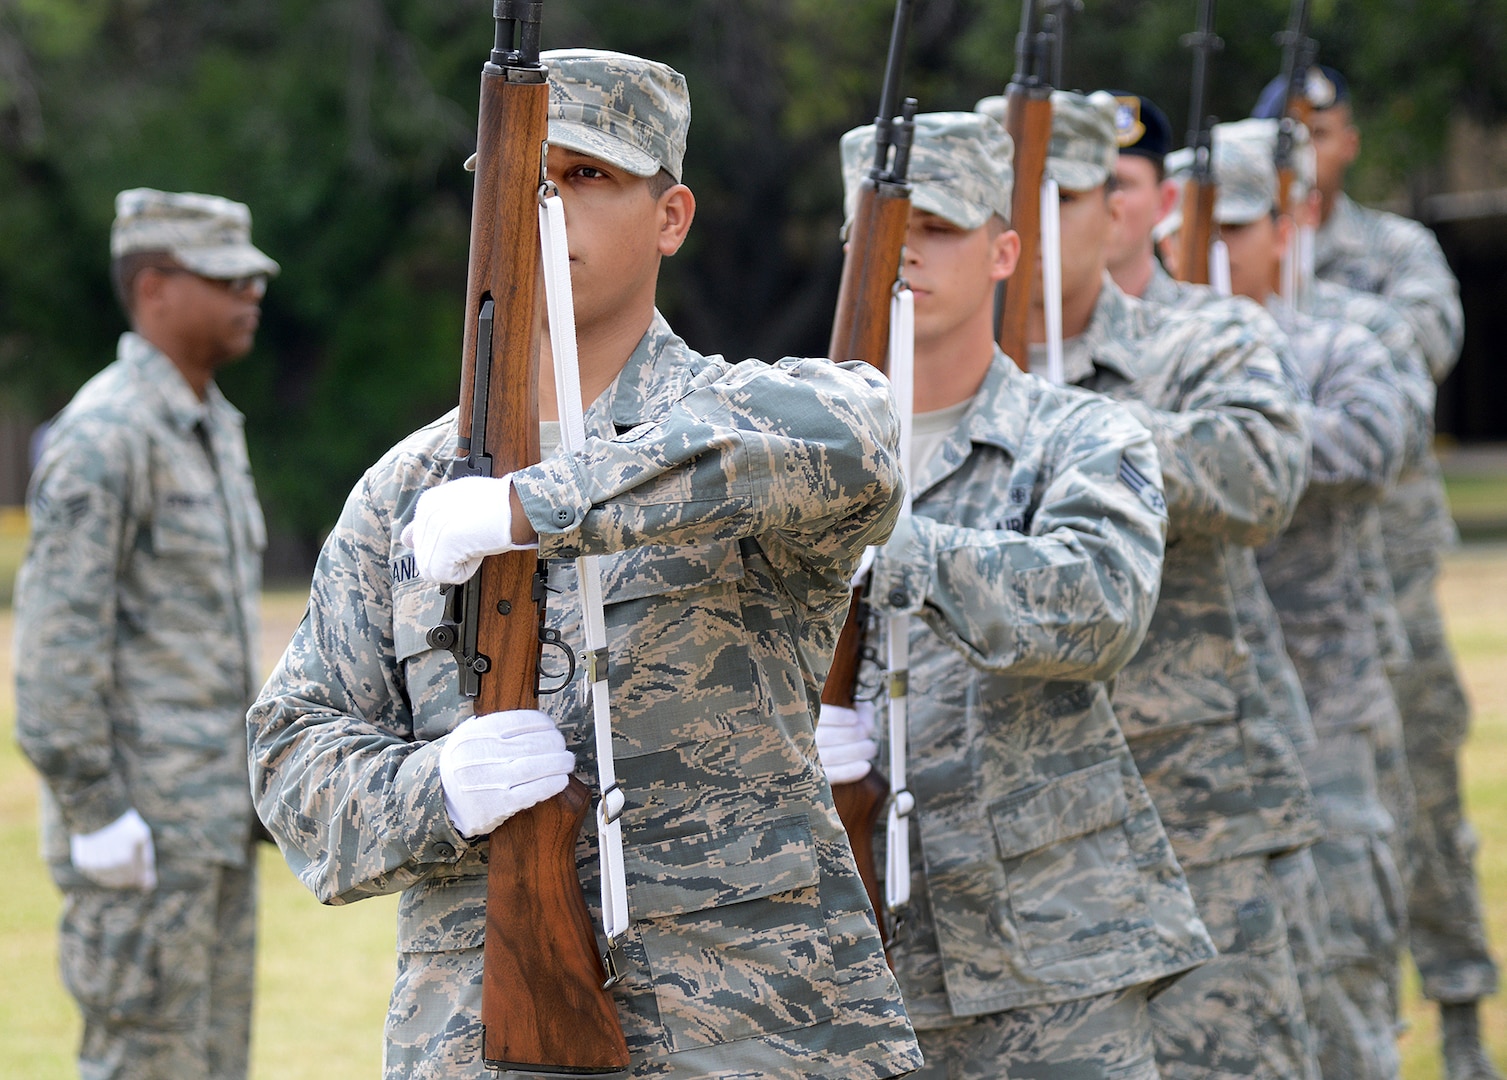 Joint Base San Antonio Honor Guard riflemen practice a 21-gun salute Aug. 8 at JBSA-Lackland. Honor guards from JBSA-Lackland and JBSA-Randolph were recently consolidated. (U.S. Air Force photo by Benjamin Faske/ Released)